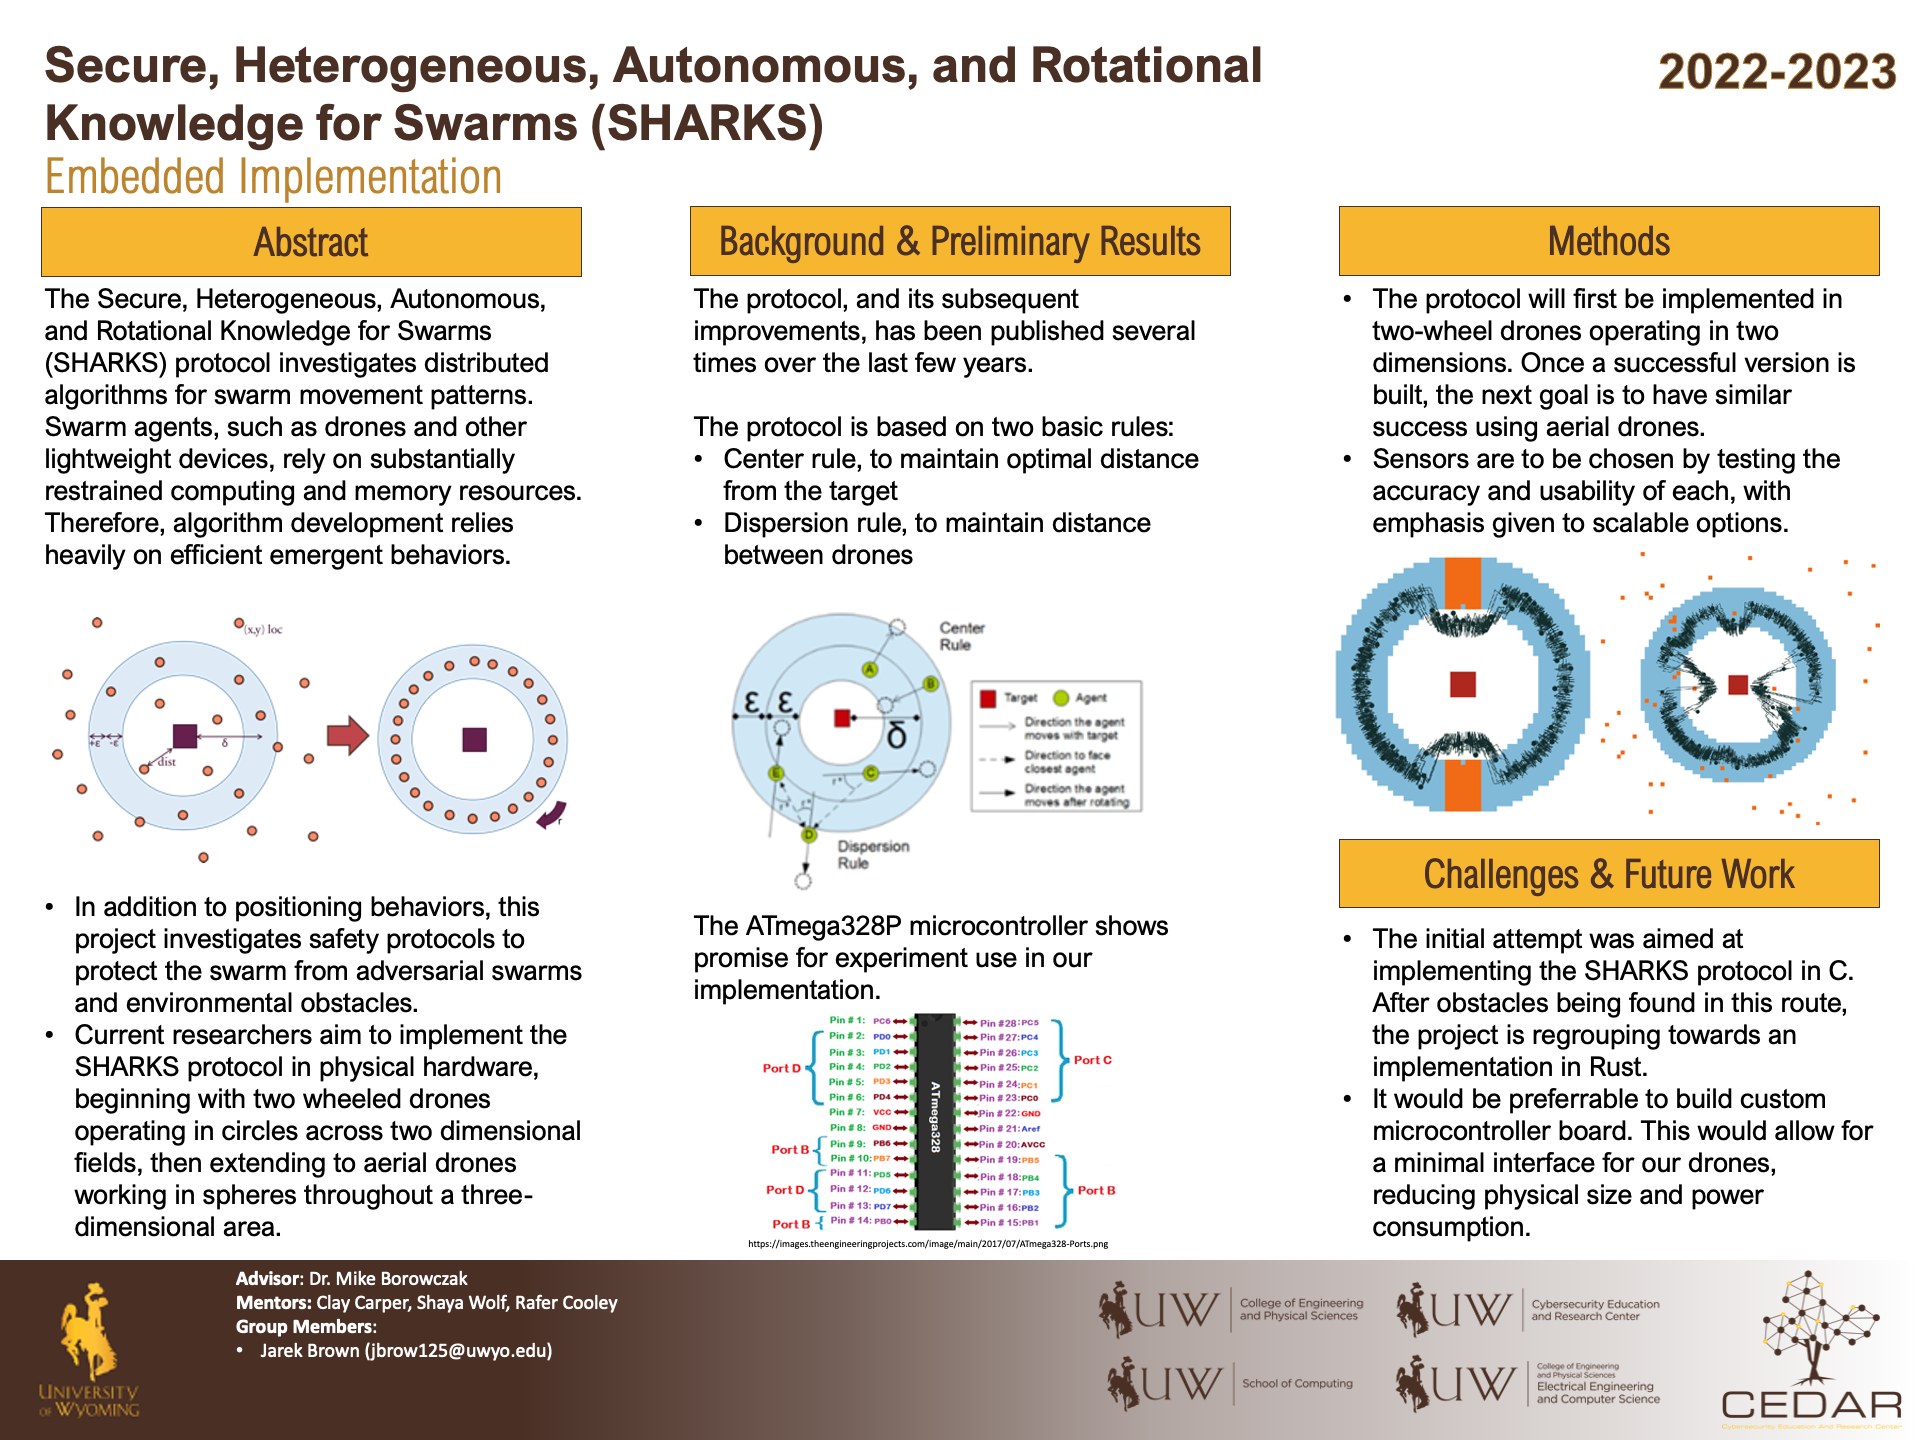  Poster for Secure, Heterogeneous, Autonomous, and Rotational Knowledge for Swarms (SHARKS)